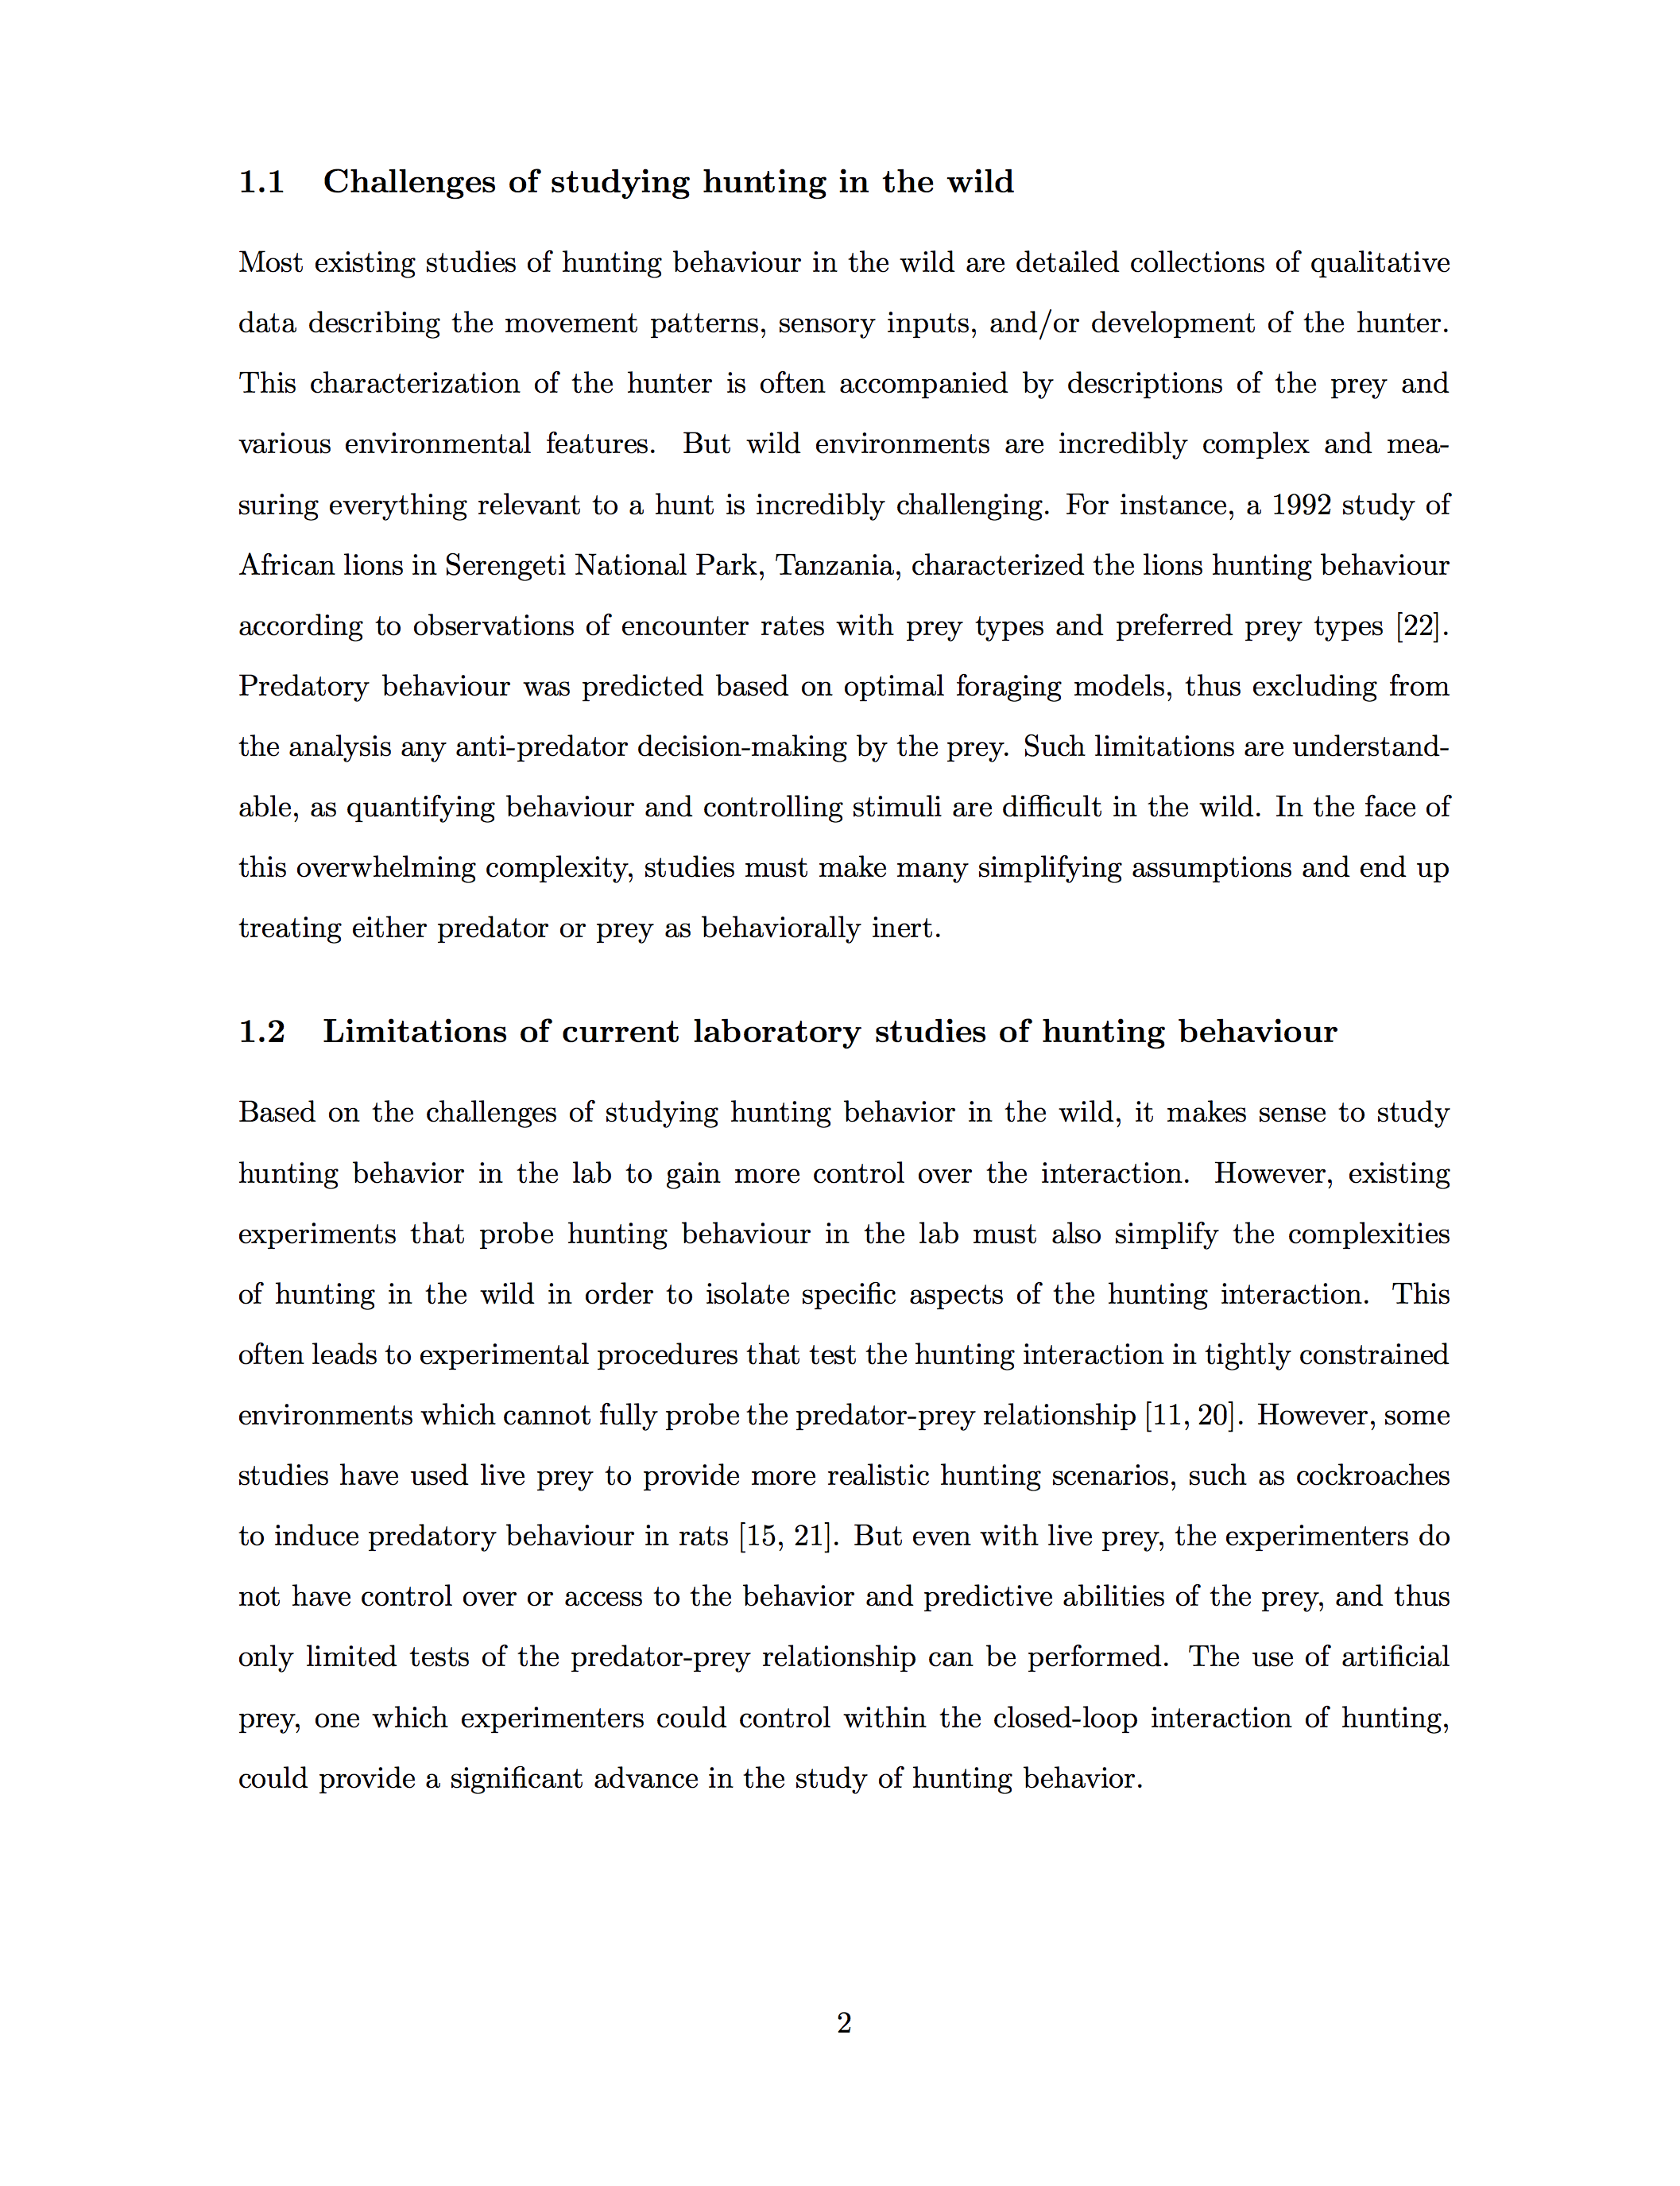 PhD thesis proposal, page 02